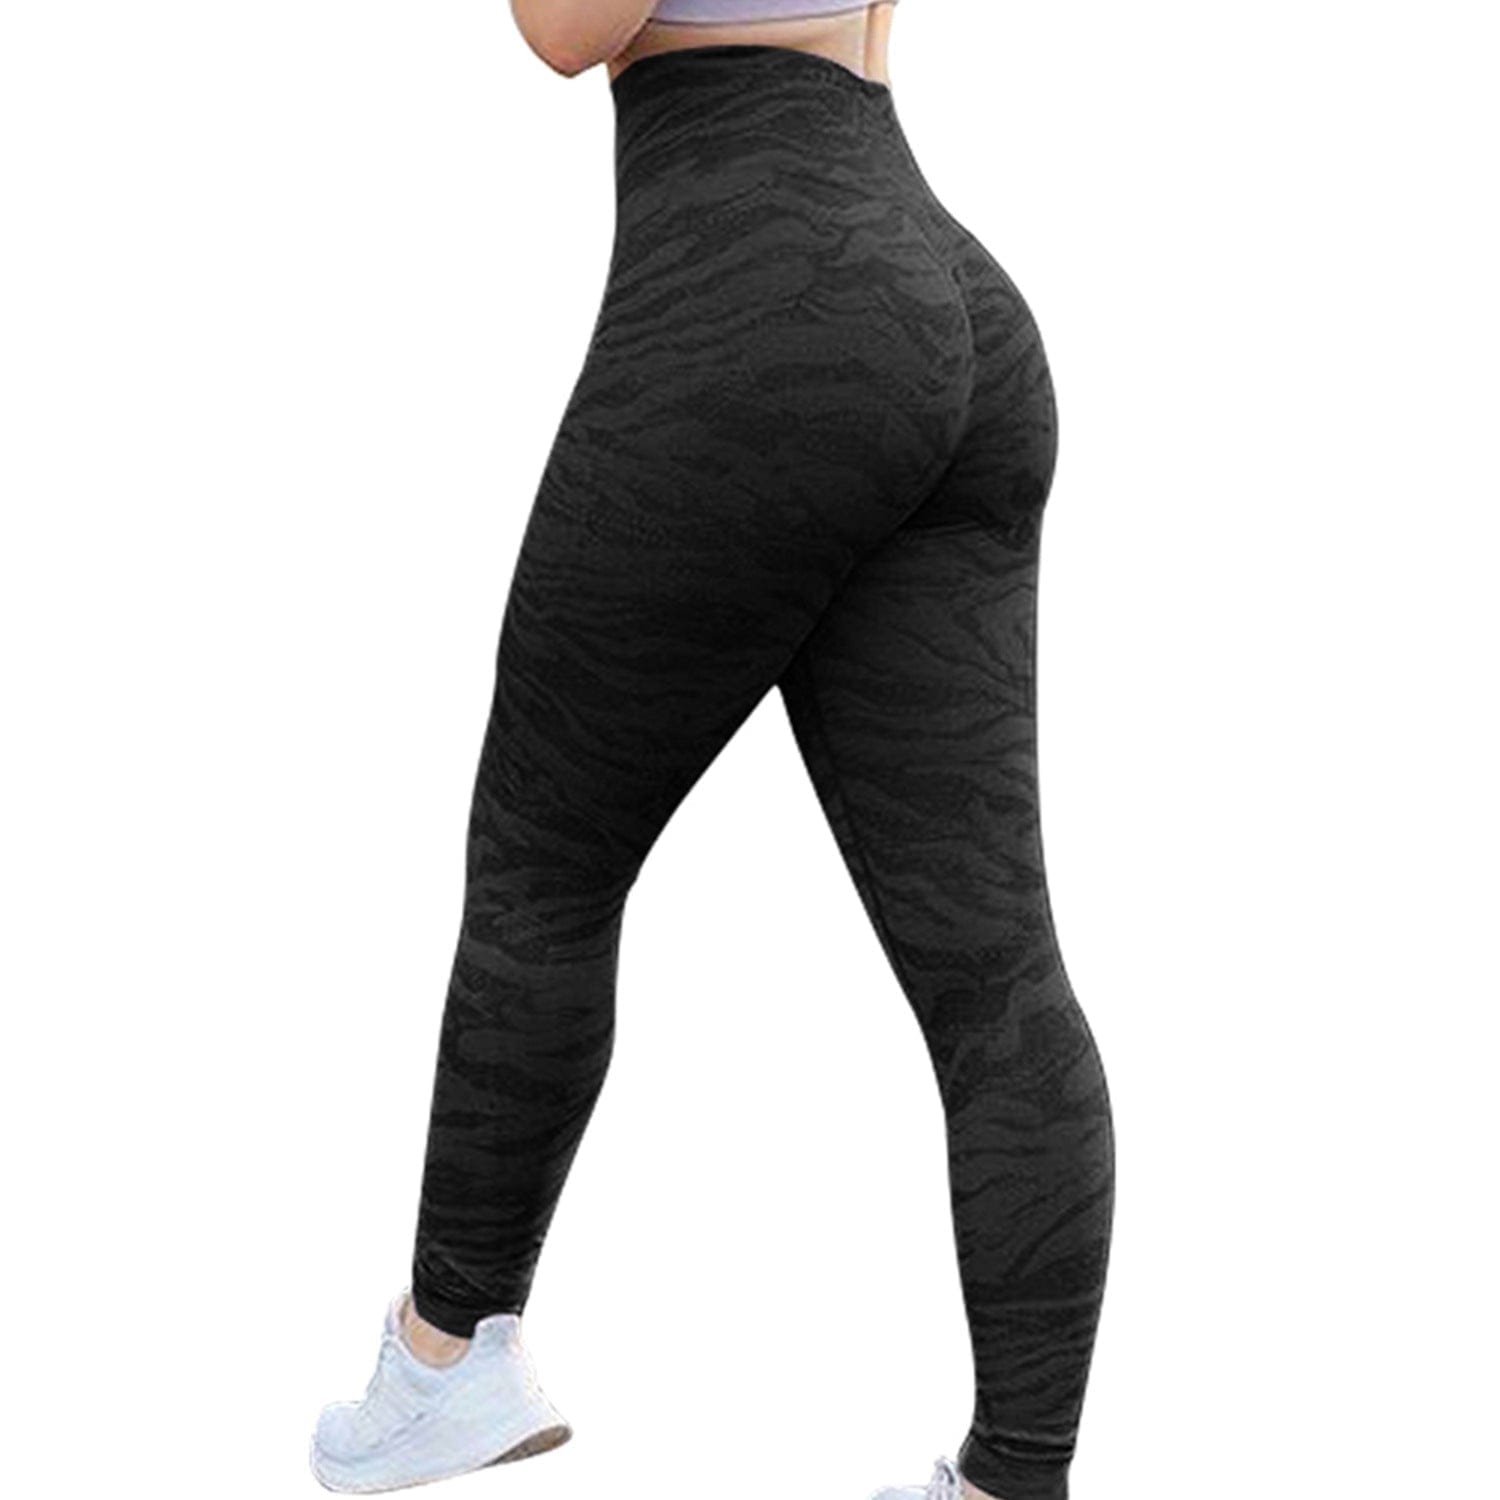 Black Booty Workout Leggings for Gym